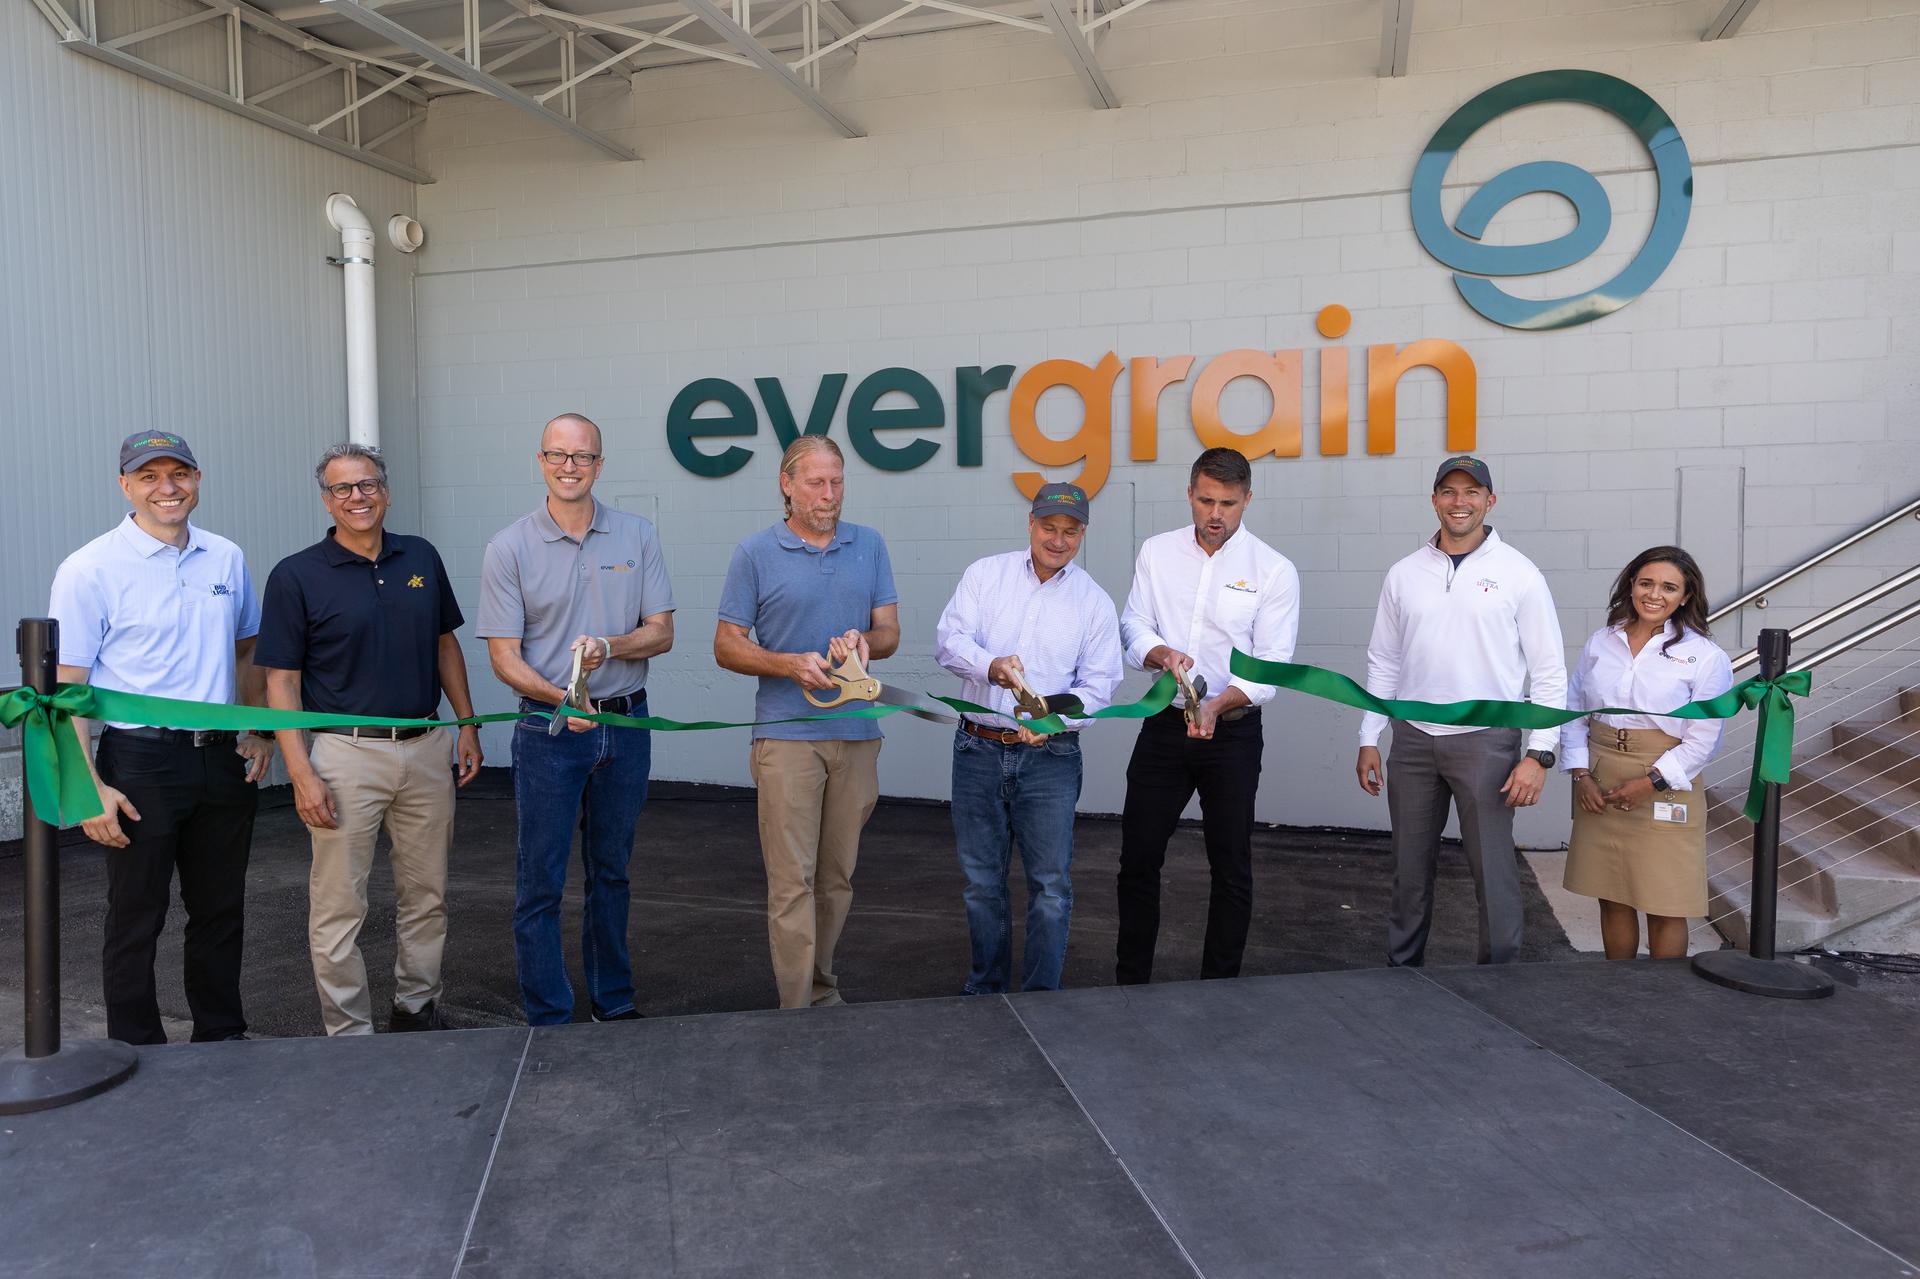 Anheuser-Busch & EverGrain Celebrate Opening of the First Major Site of U.S. Operations